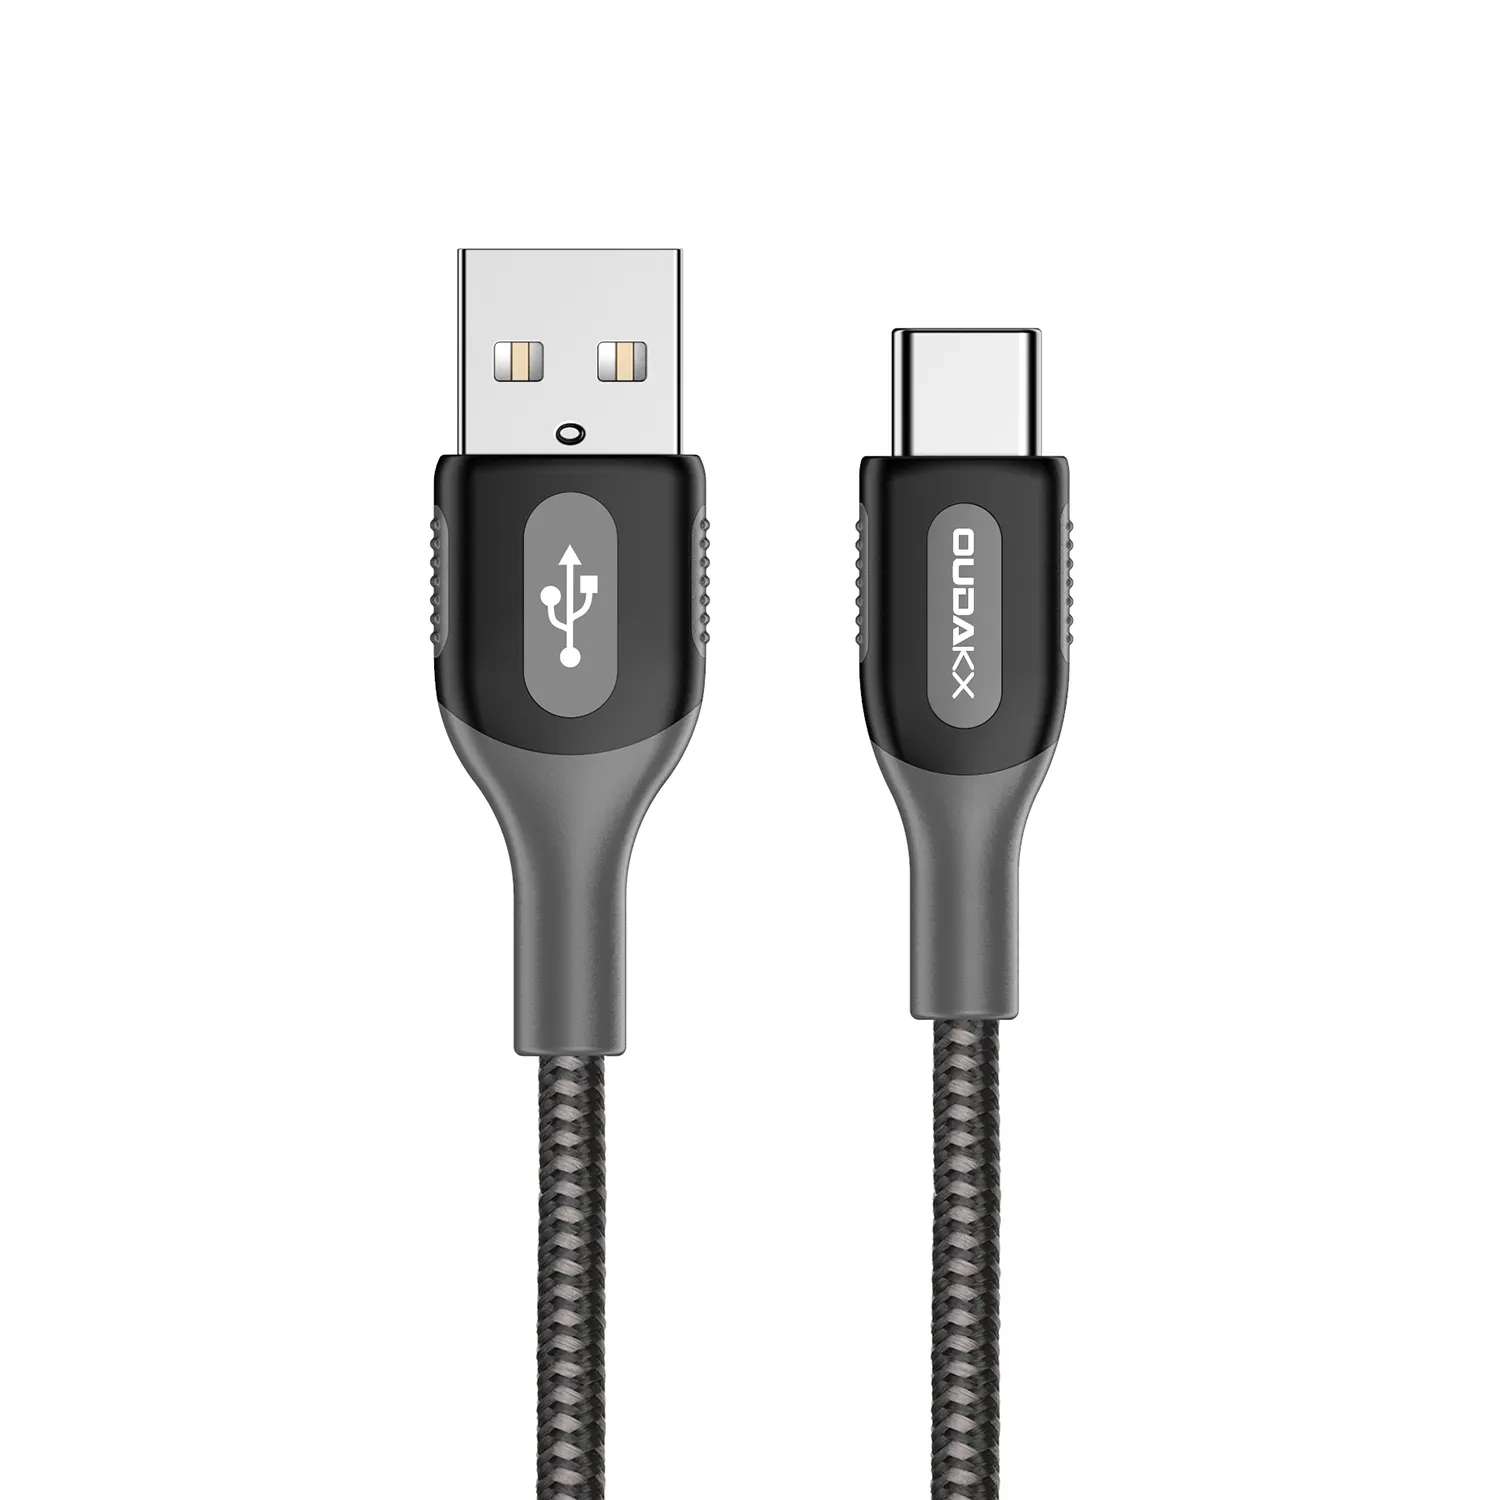 USB Type C Cable For Samsung S10 S9 S8 Fast Charge Type-C Mobile Phone Charging Data Cable USB C Cable for Huawei